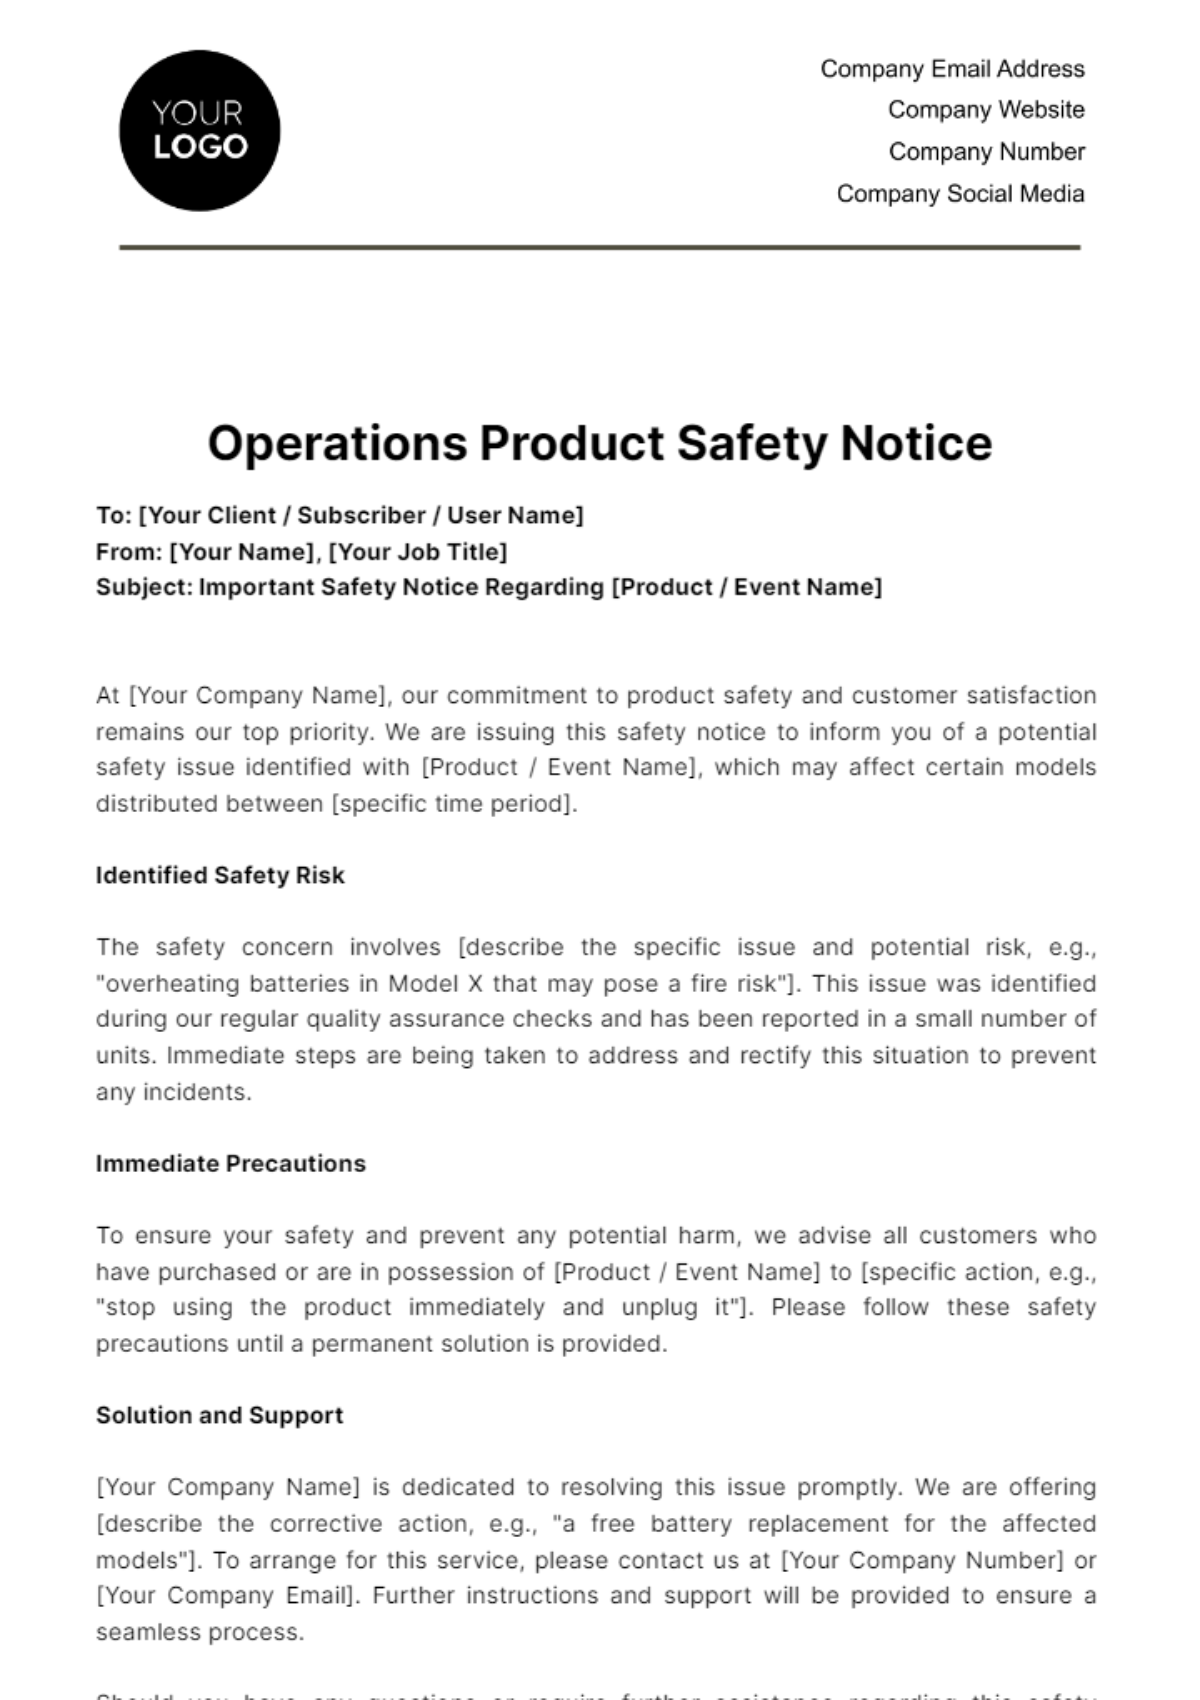 Free Operations Product Safety Notice Template